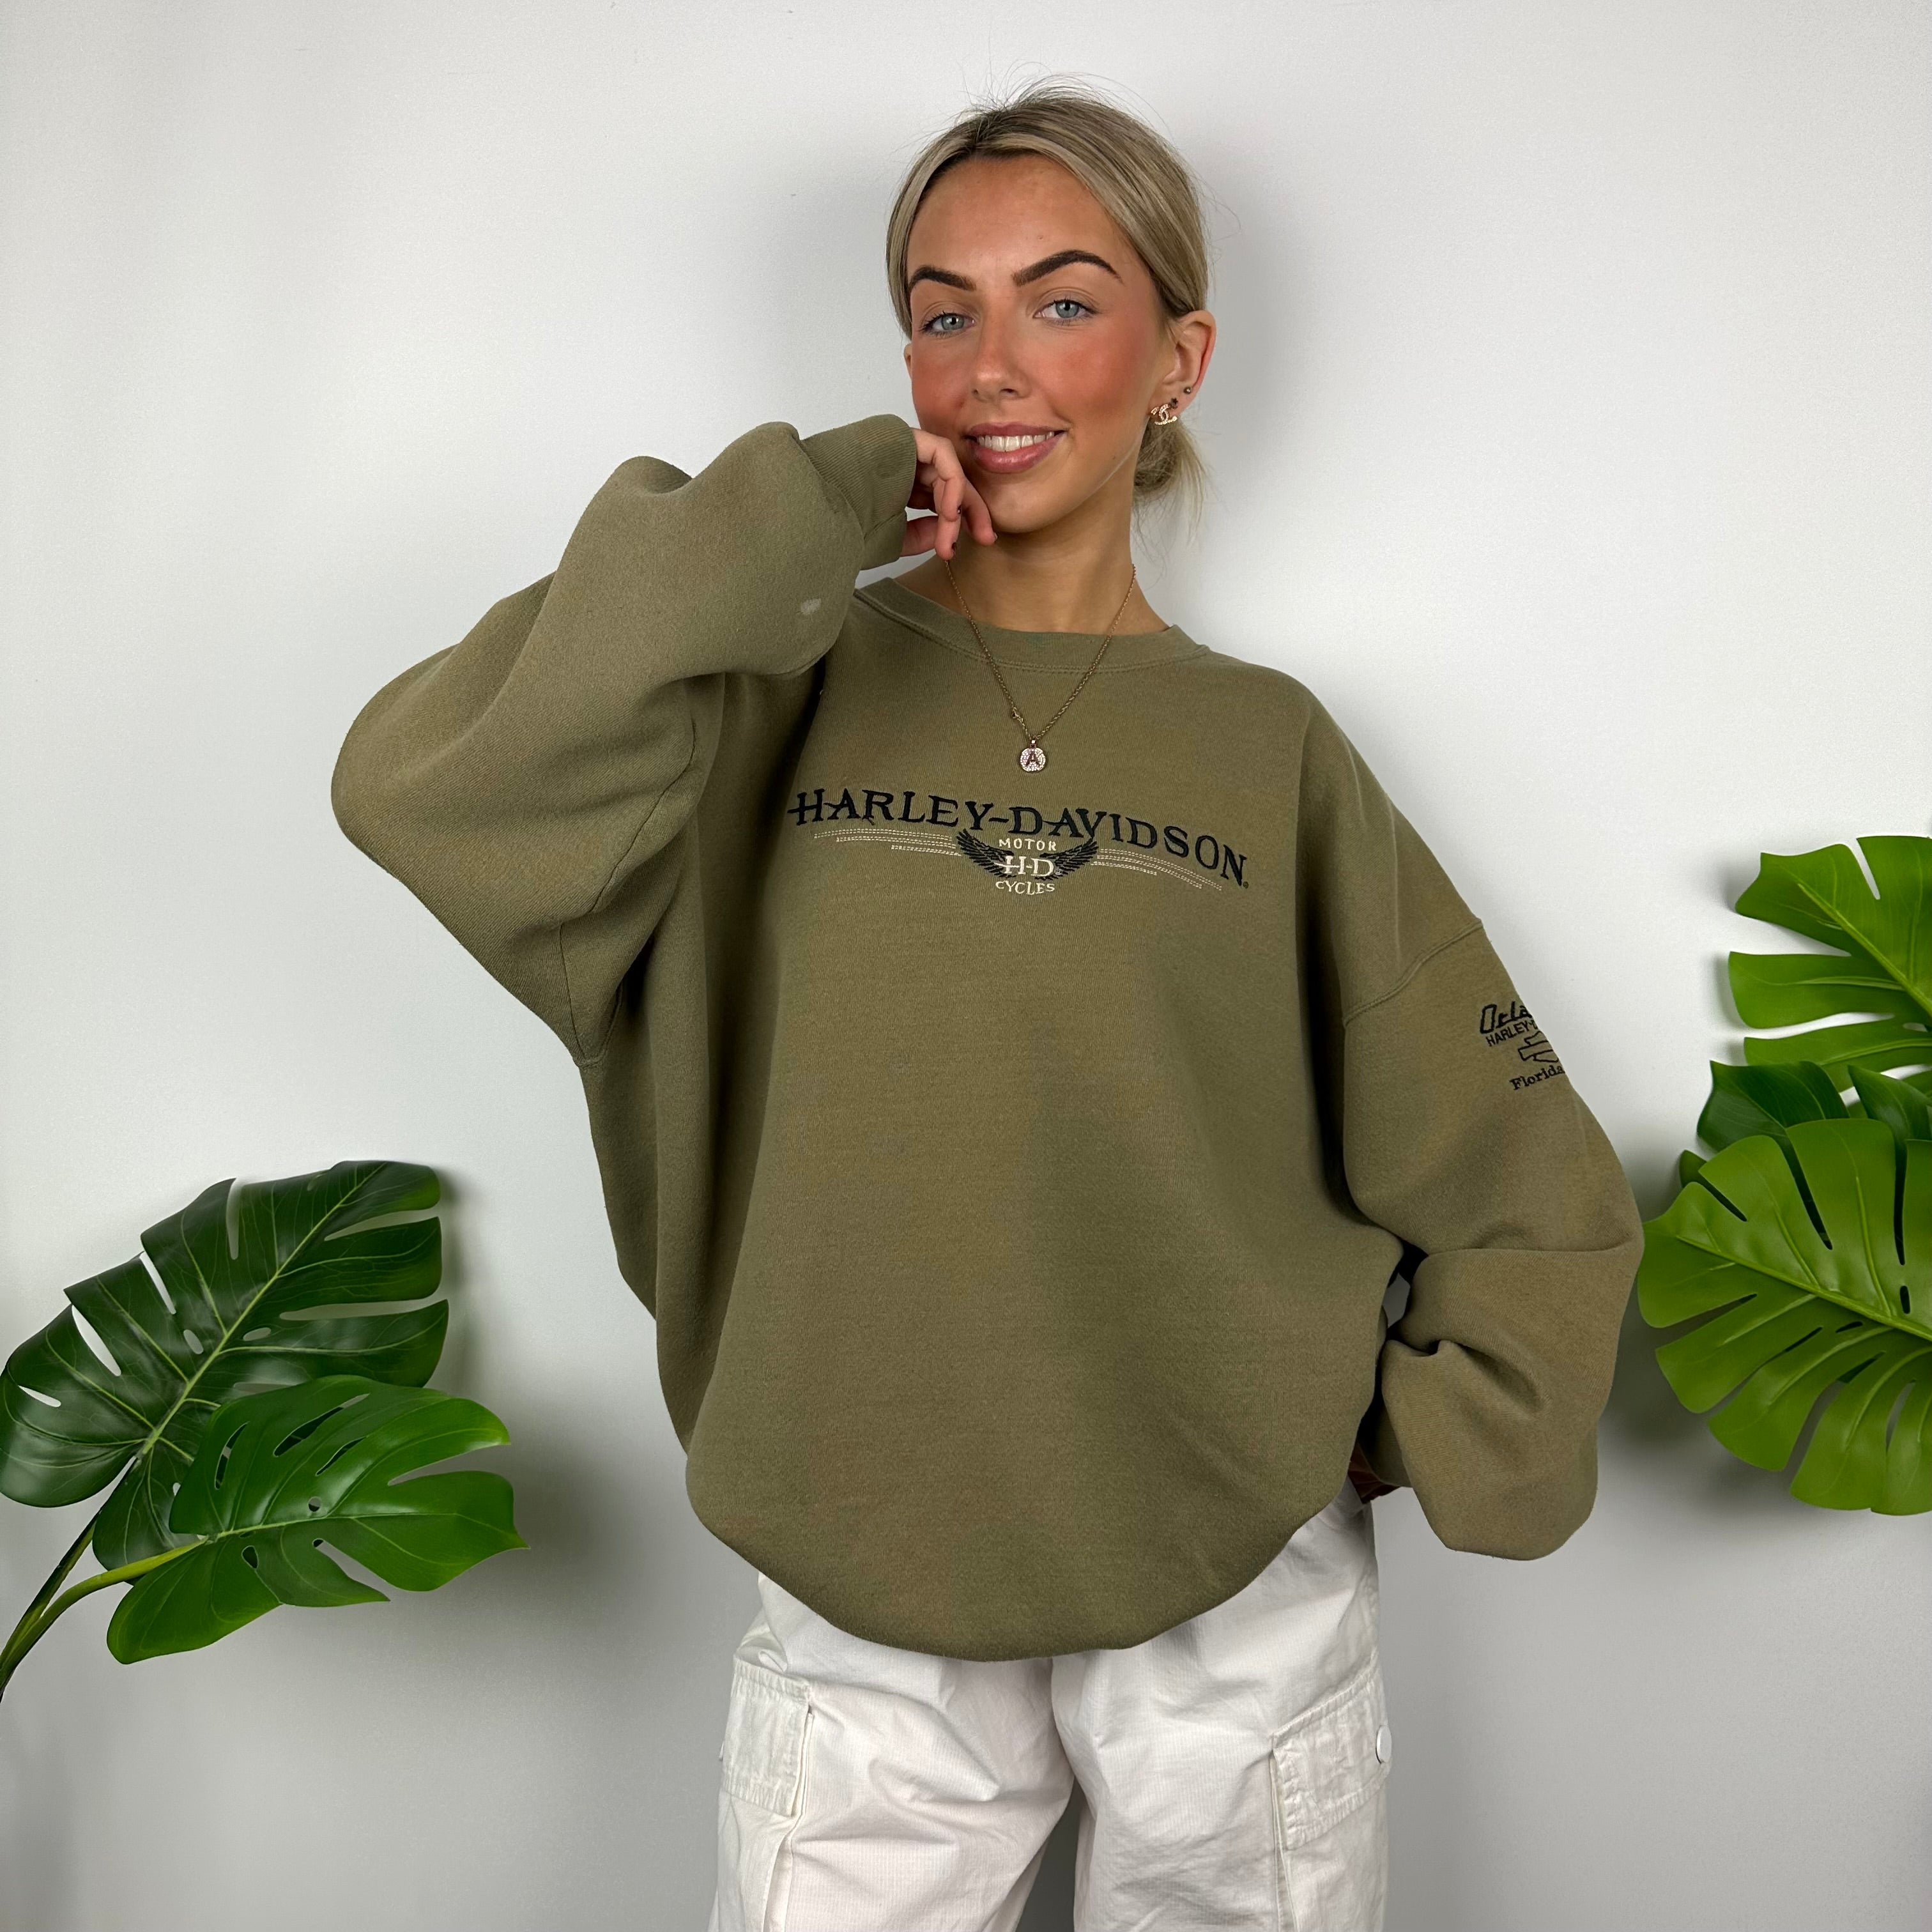 Harley Davidson Khaki Green Embroidered Spell Out Sweatshirt (XL)